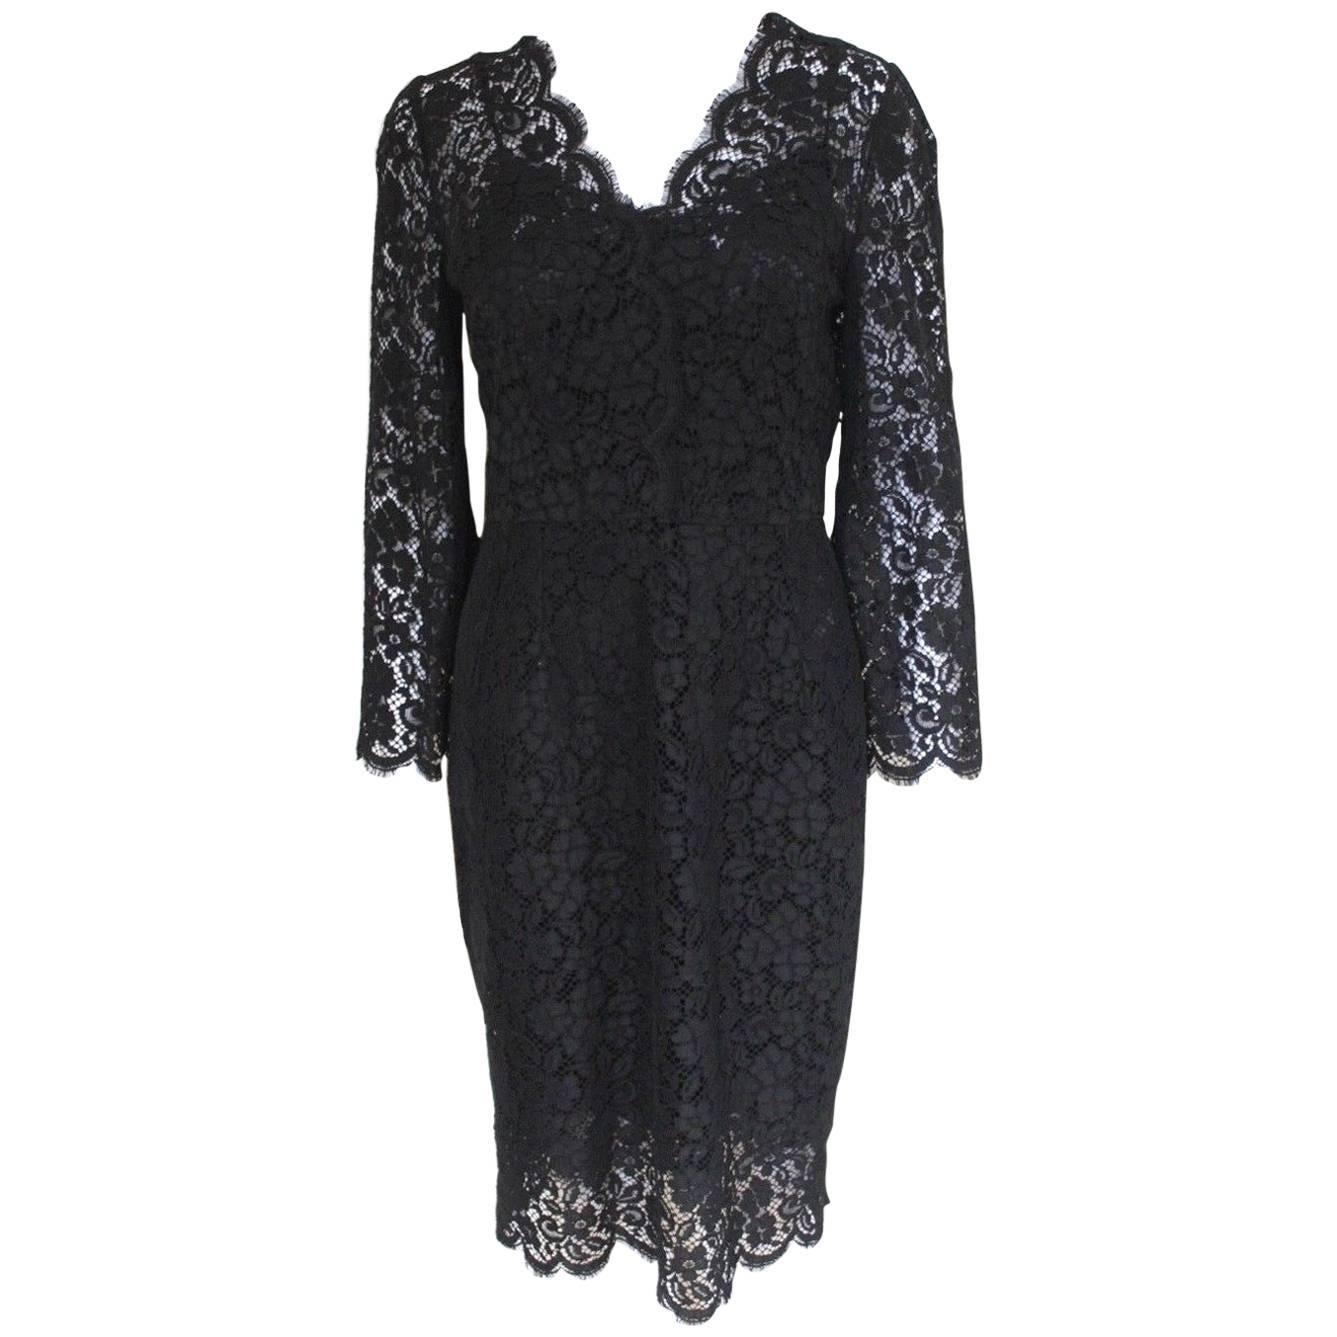 New £1983 Dolce and Gabbana Black Lace Overlay Dress Italian 44 uk 12 For Sale